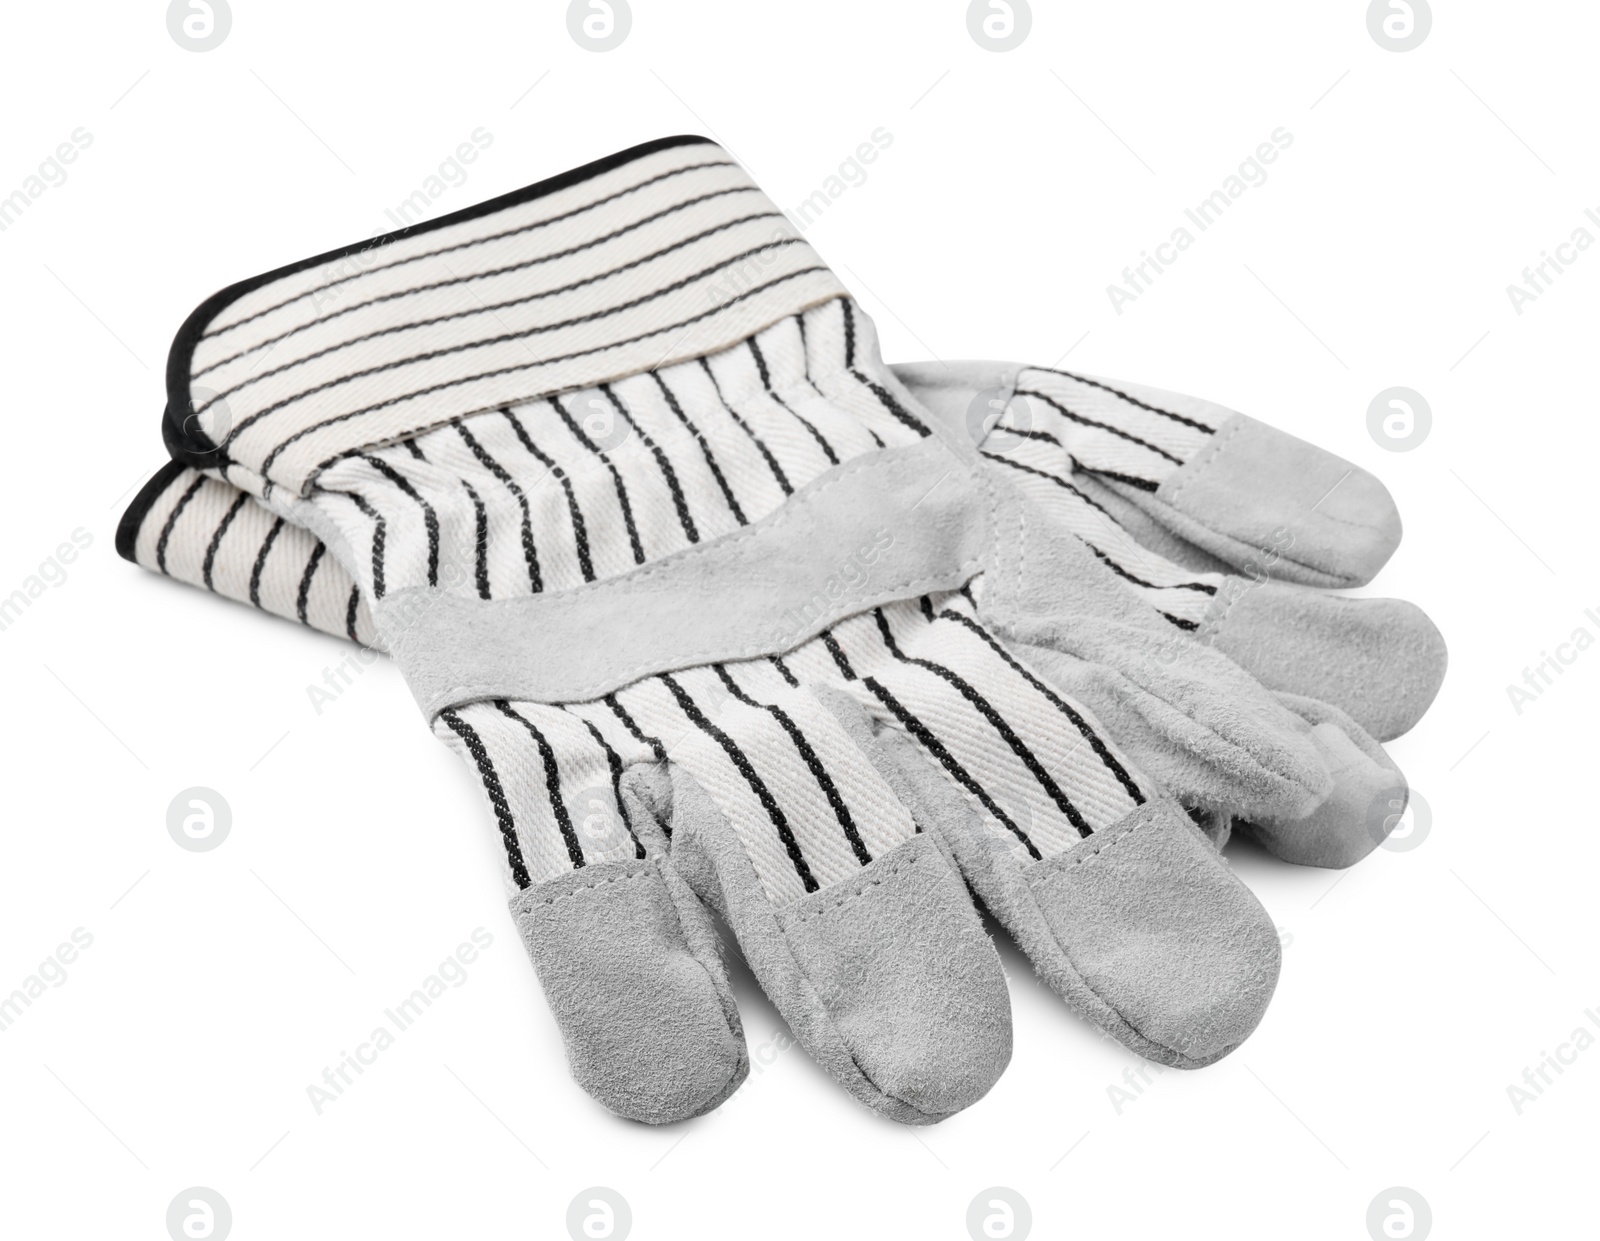 Photo of Pair of color gardening gloves isolated on white